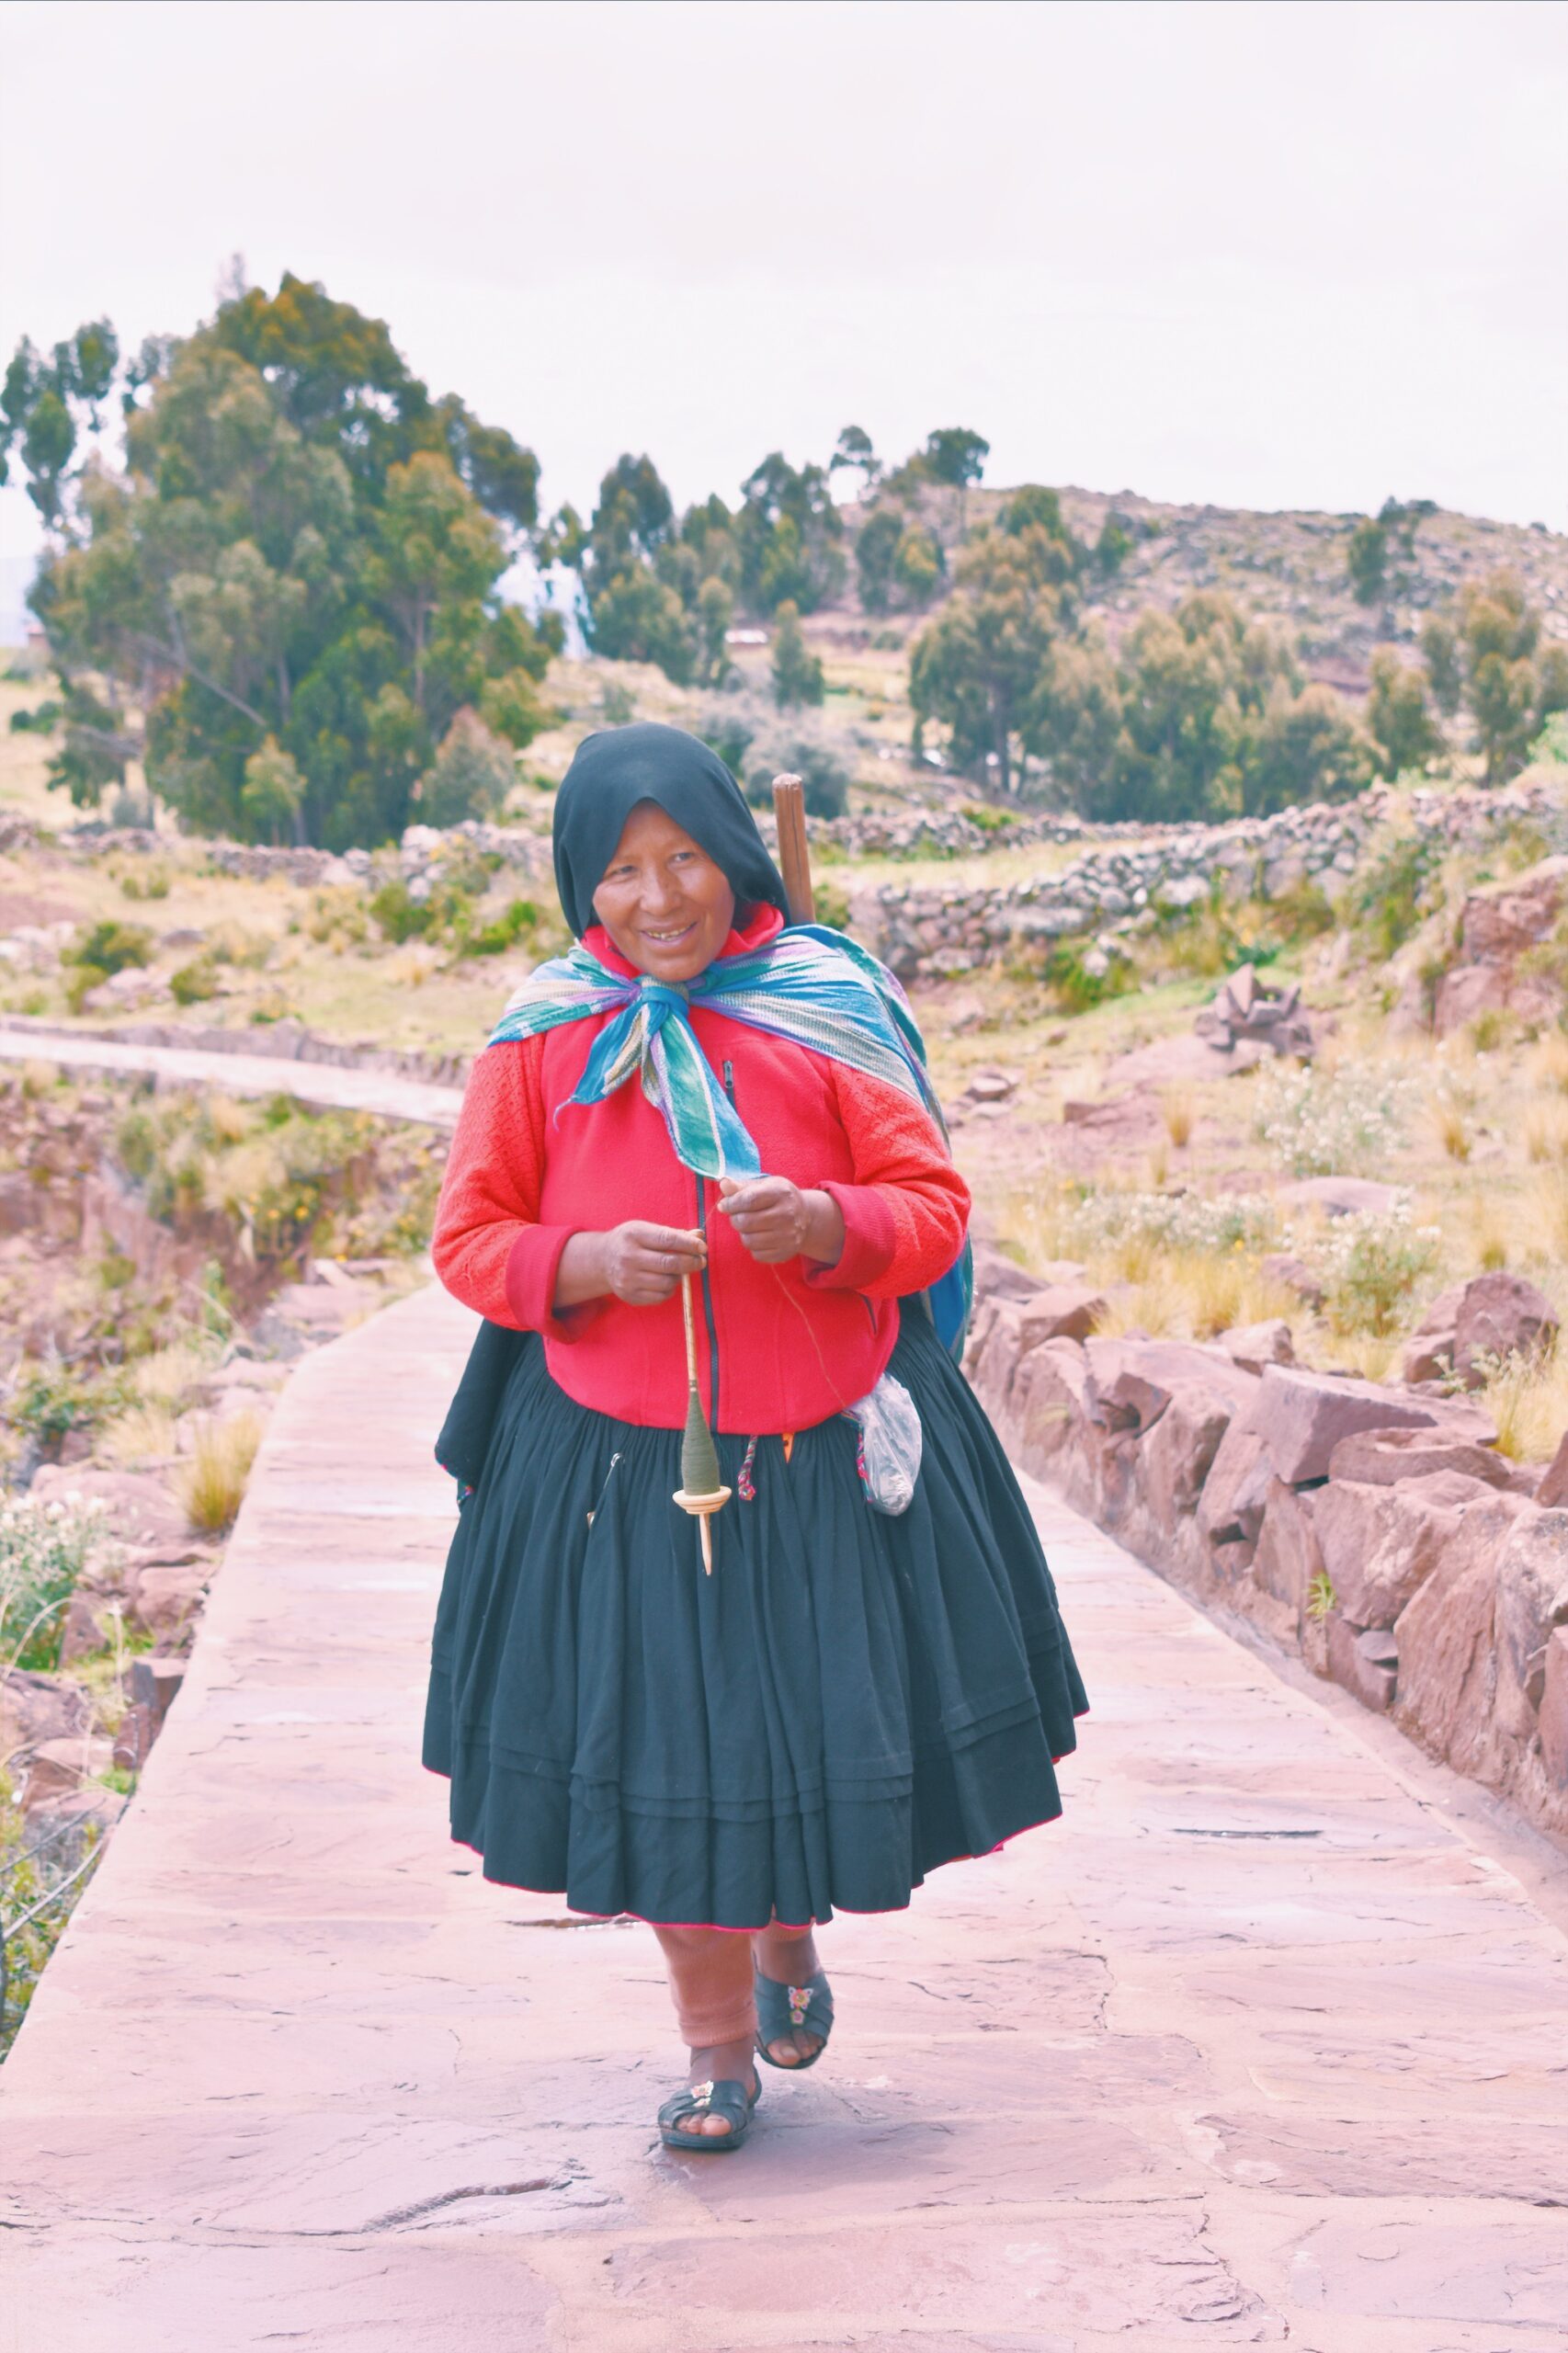 Taquile woman in traditional dress